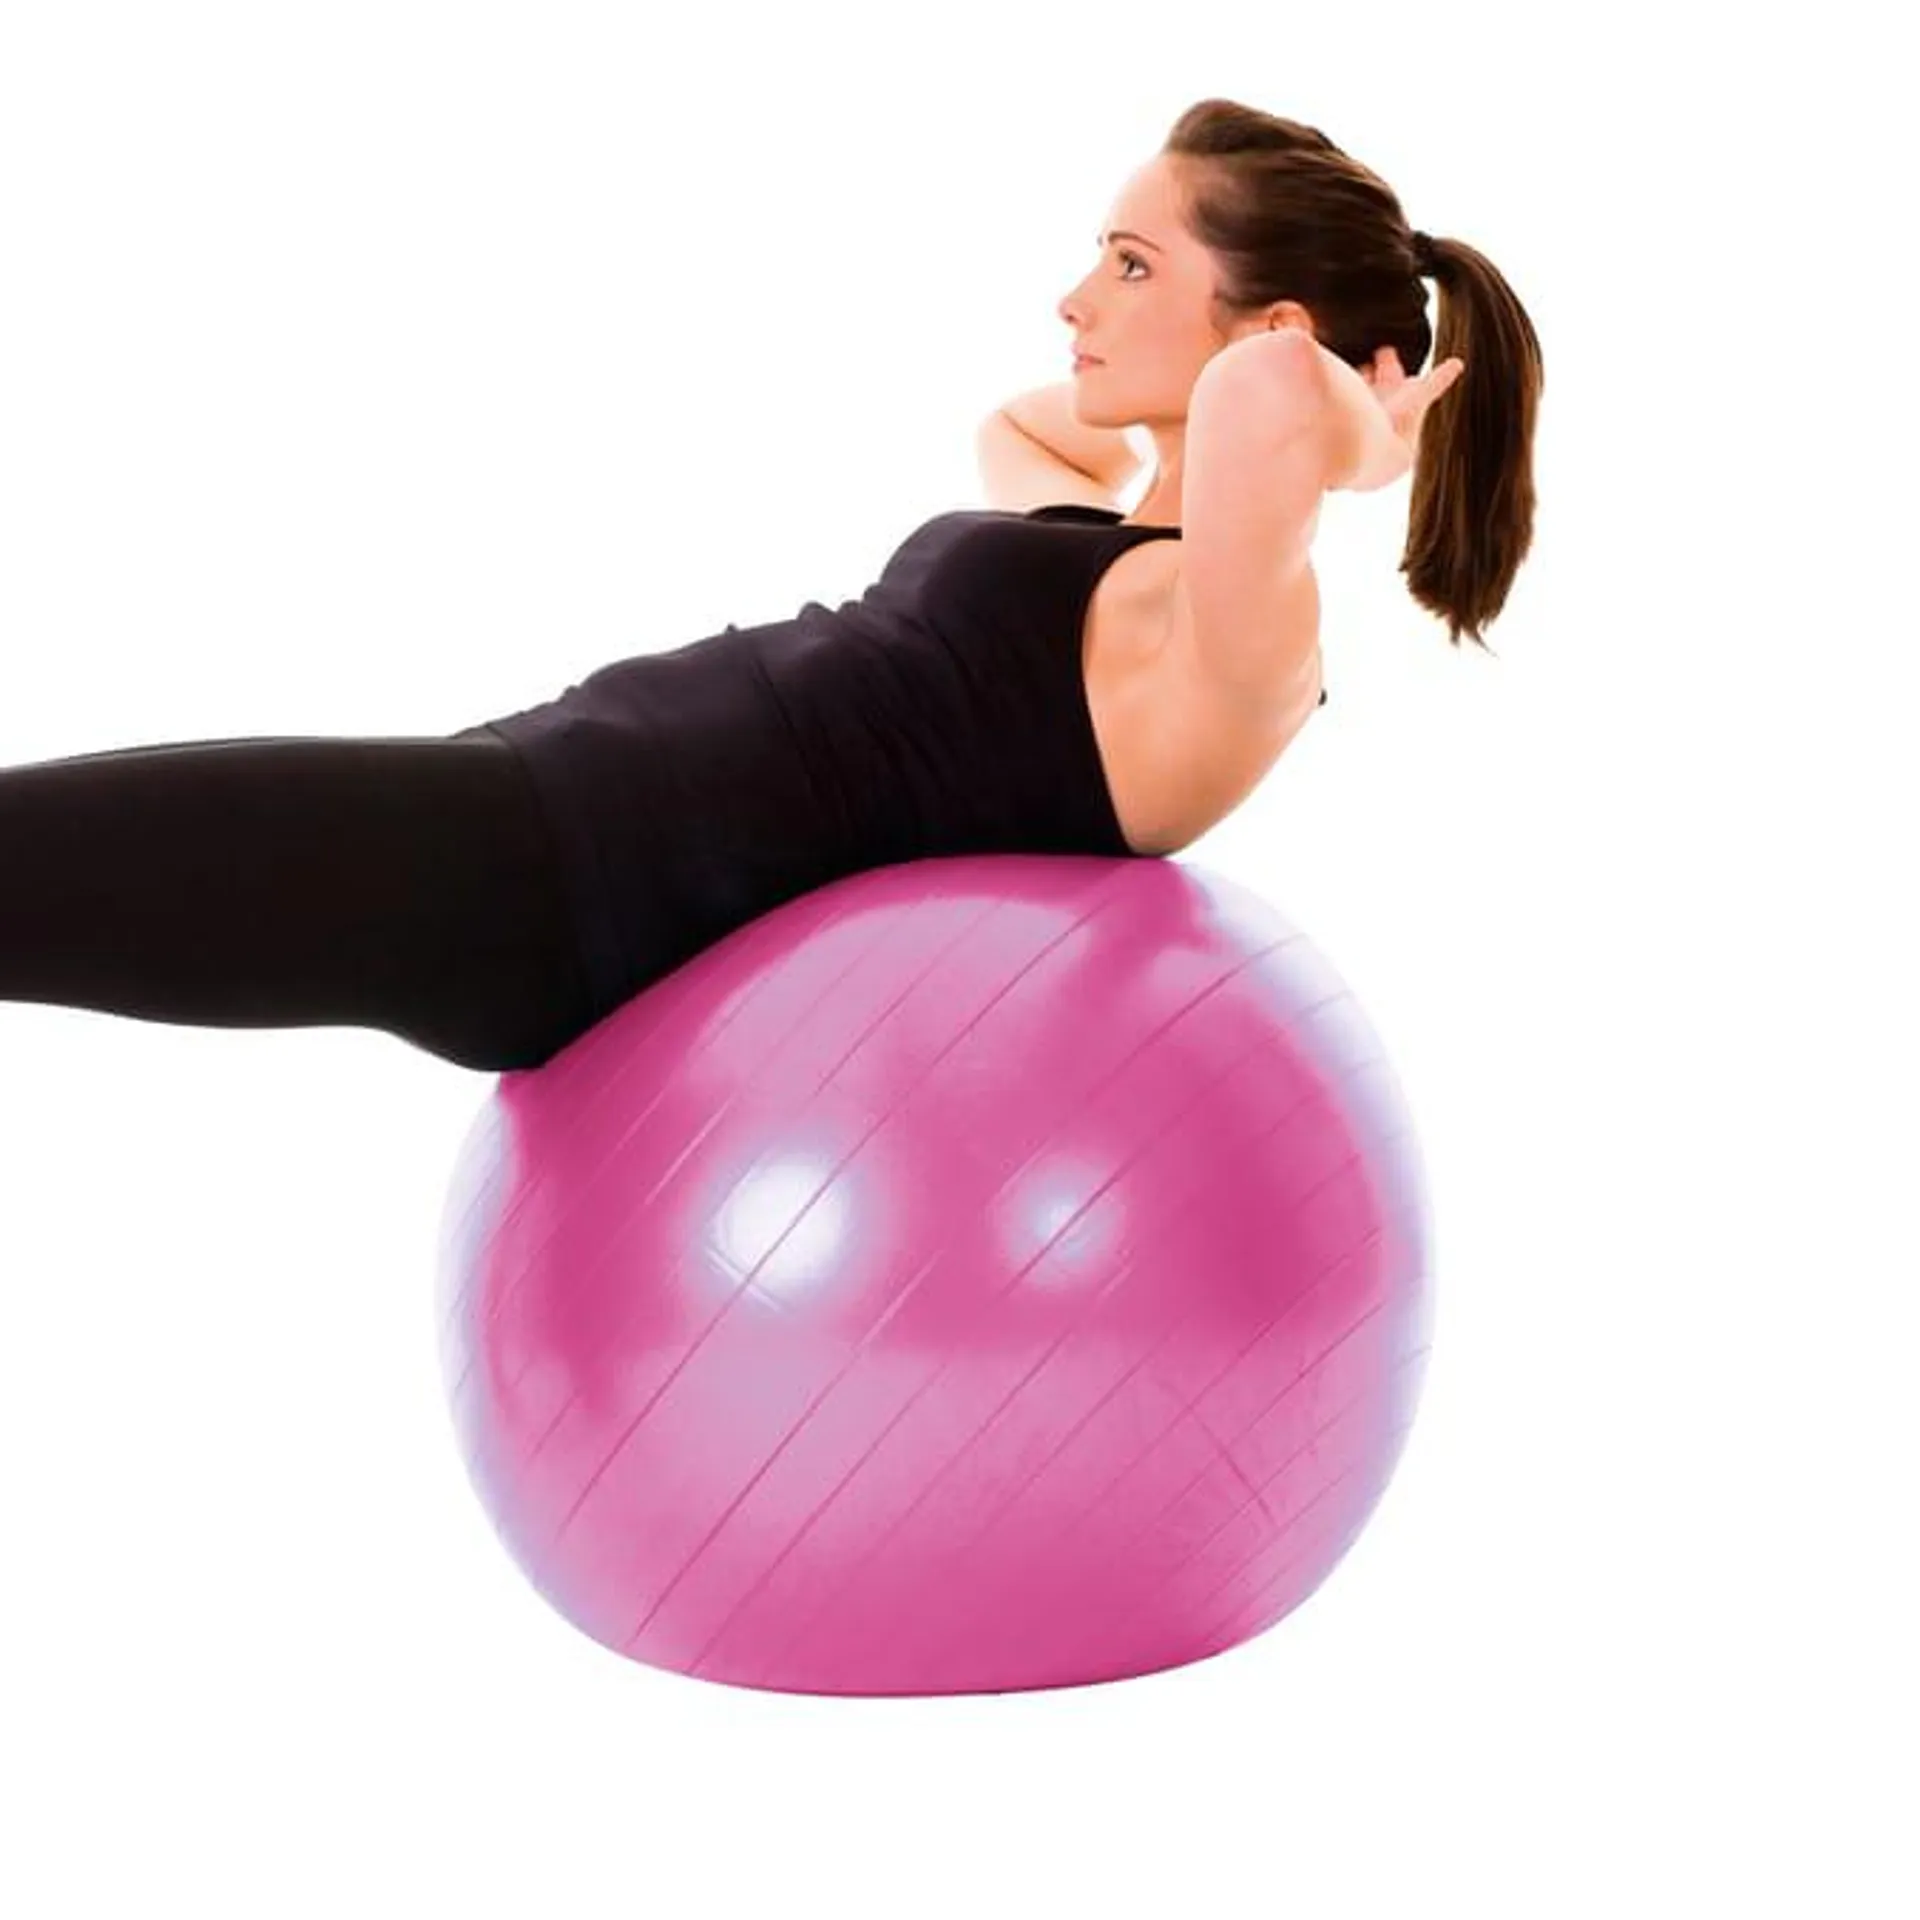 X-Tone 65cm Yoga Exercise Ball with Pump